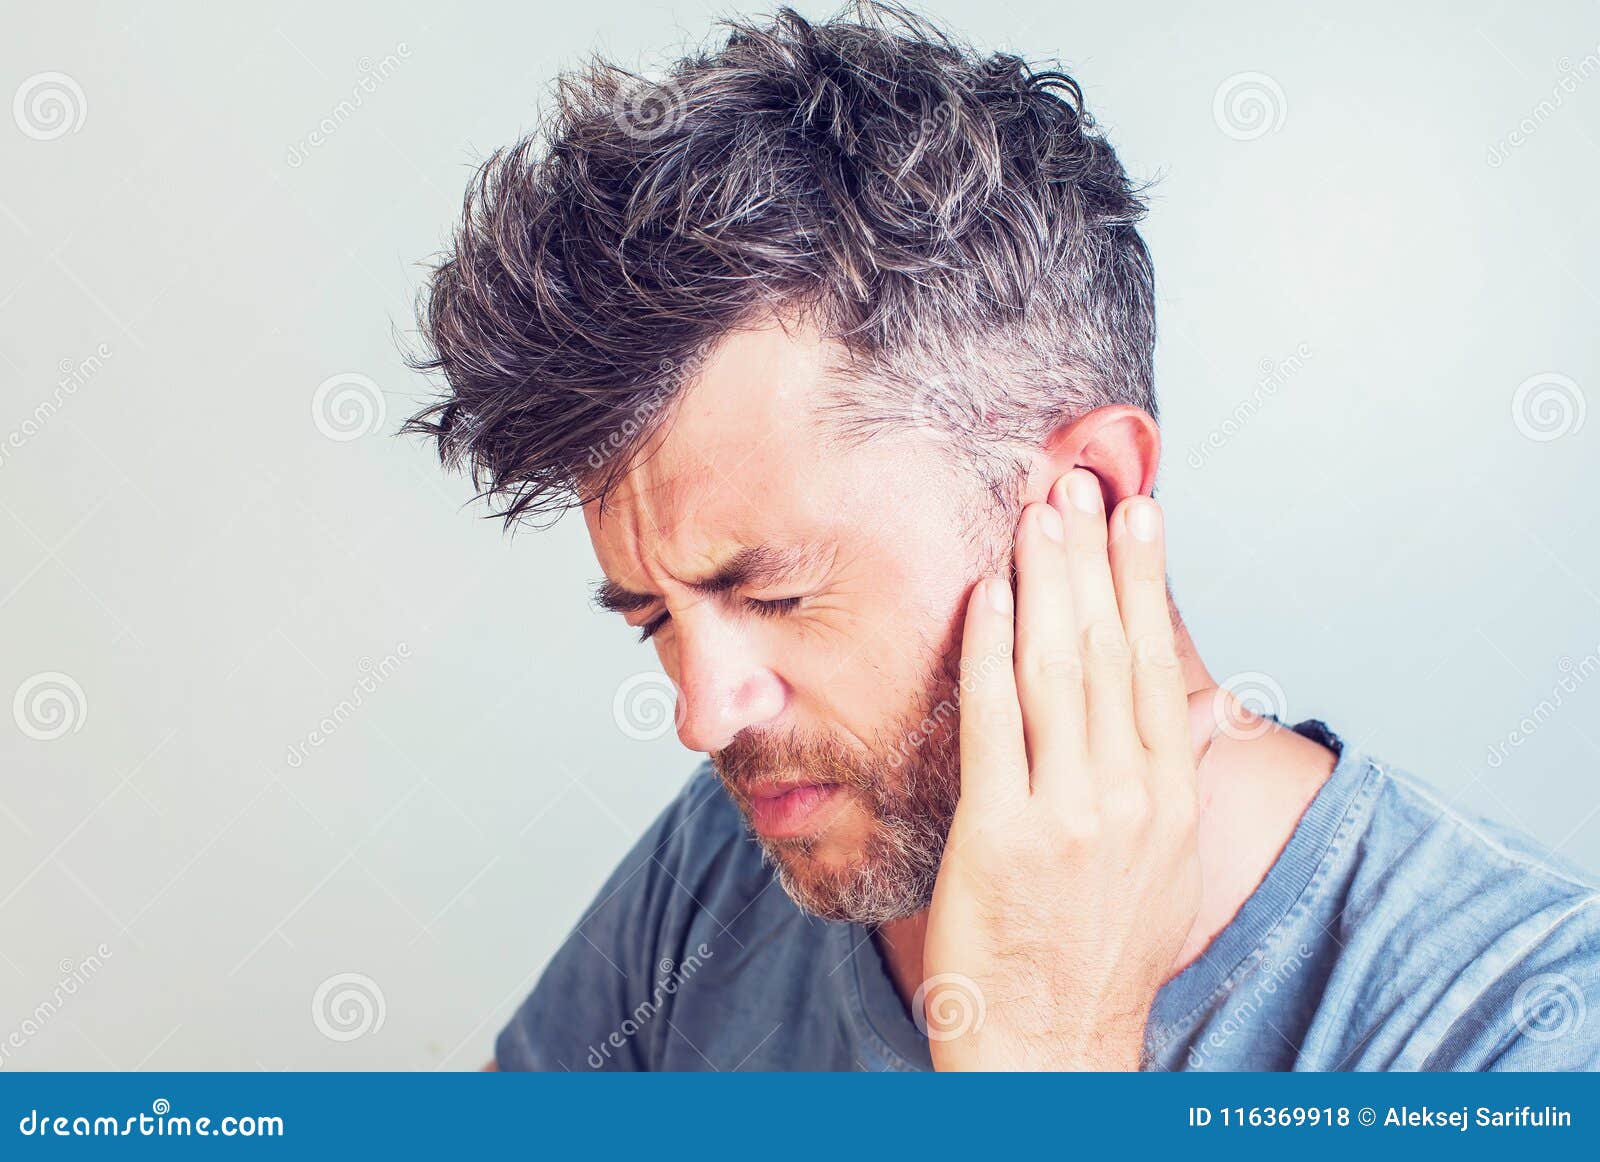 man with earache is holding his aching ear body pain concept